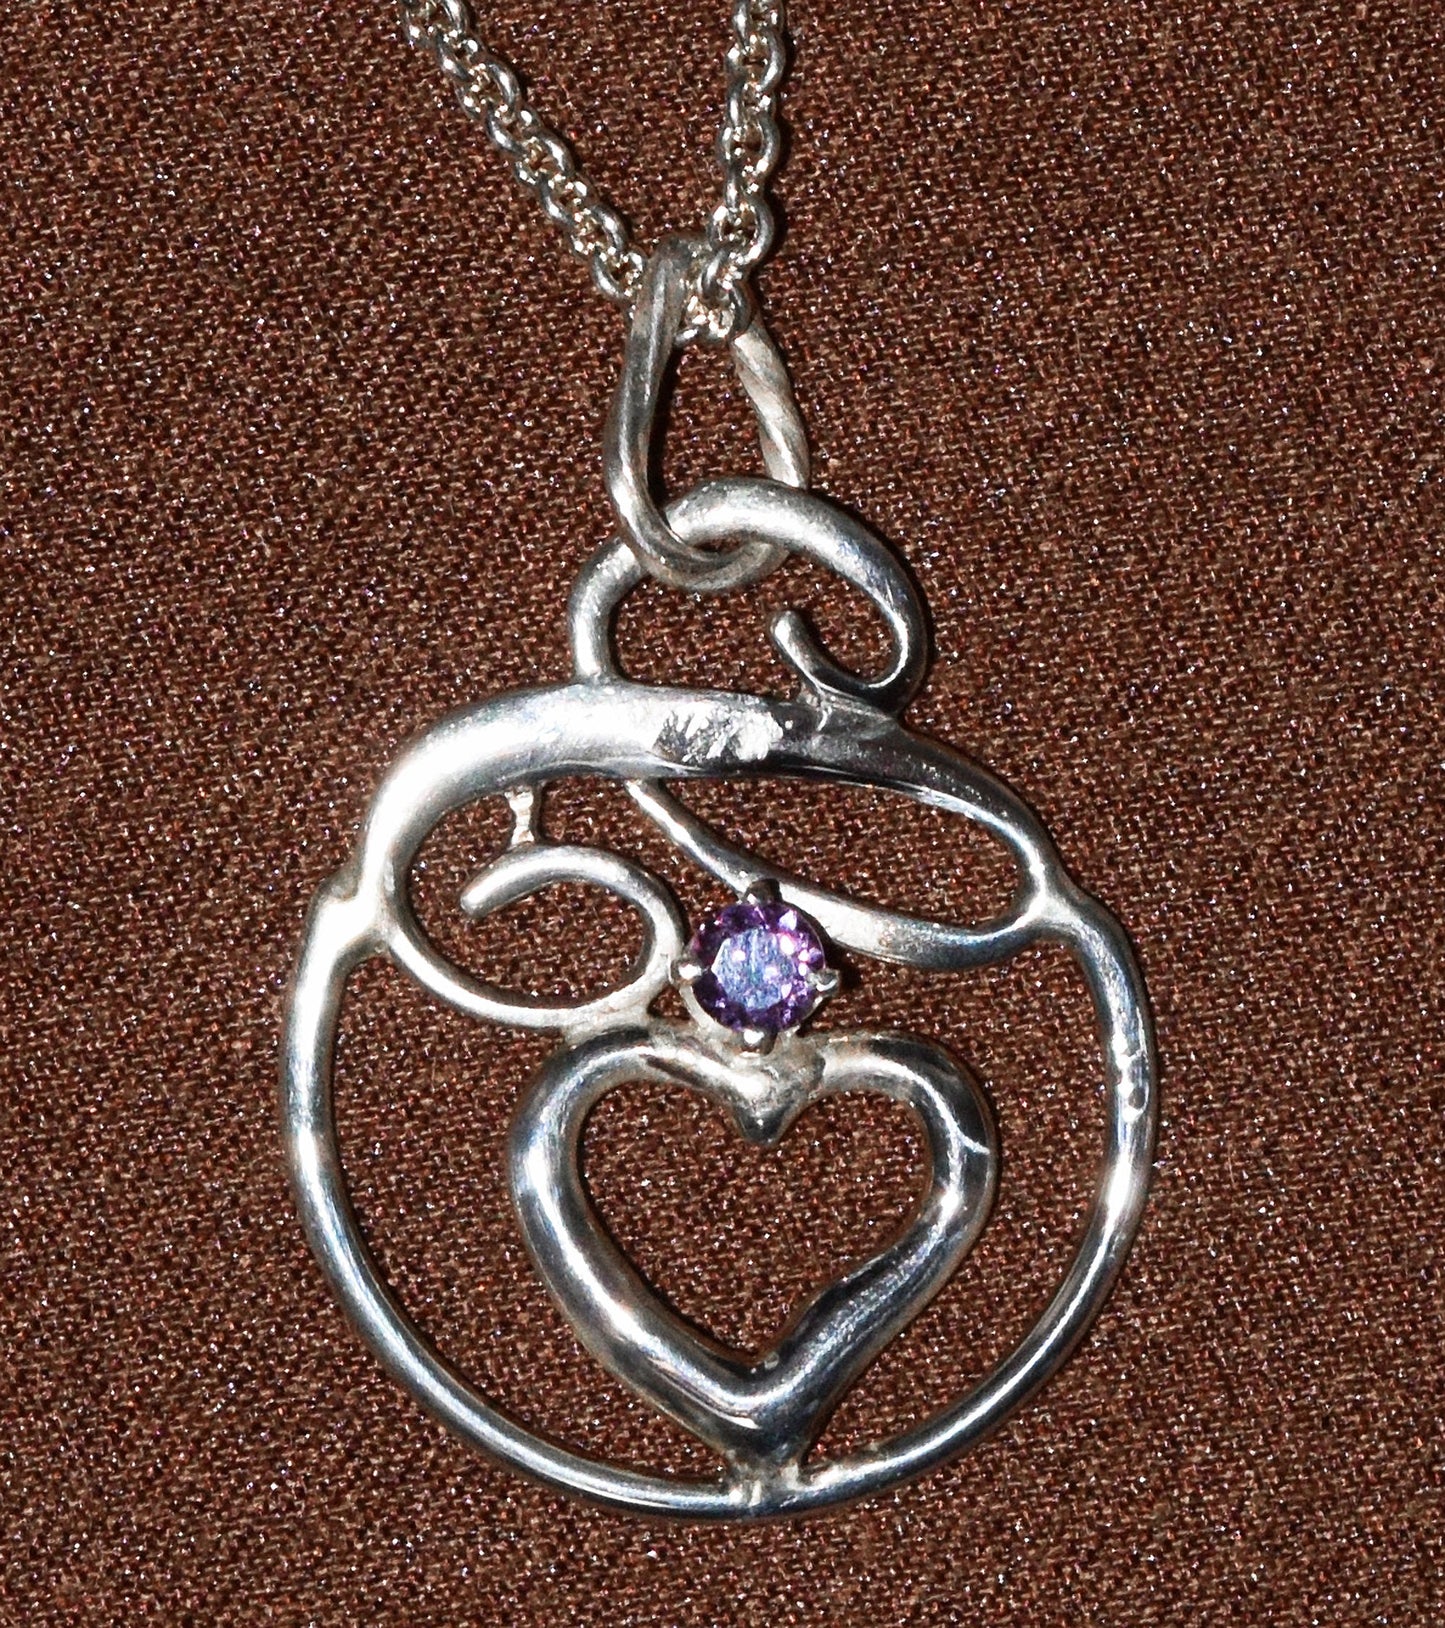 Handcrafted Sterling Silver pendant featuring a Tanzanian Sapphire. Includes a 18-inch Sterling necklace